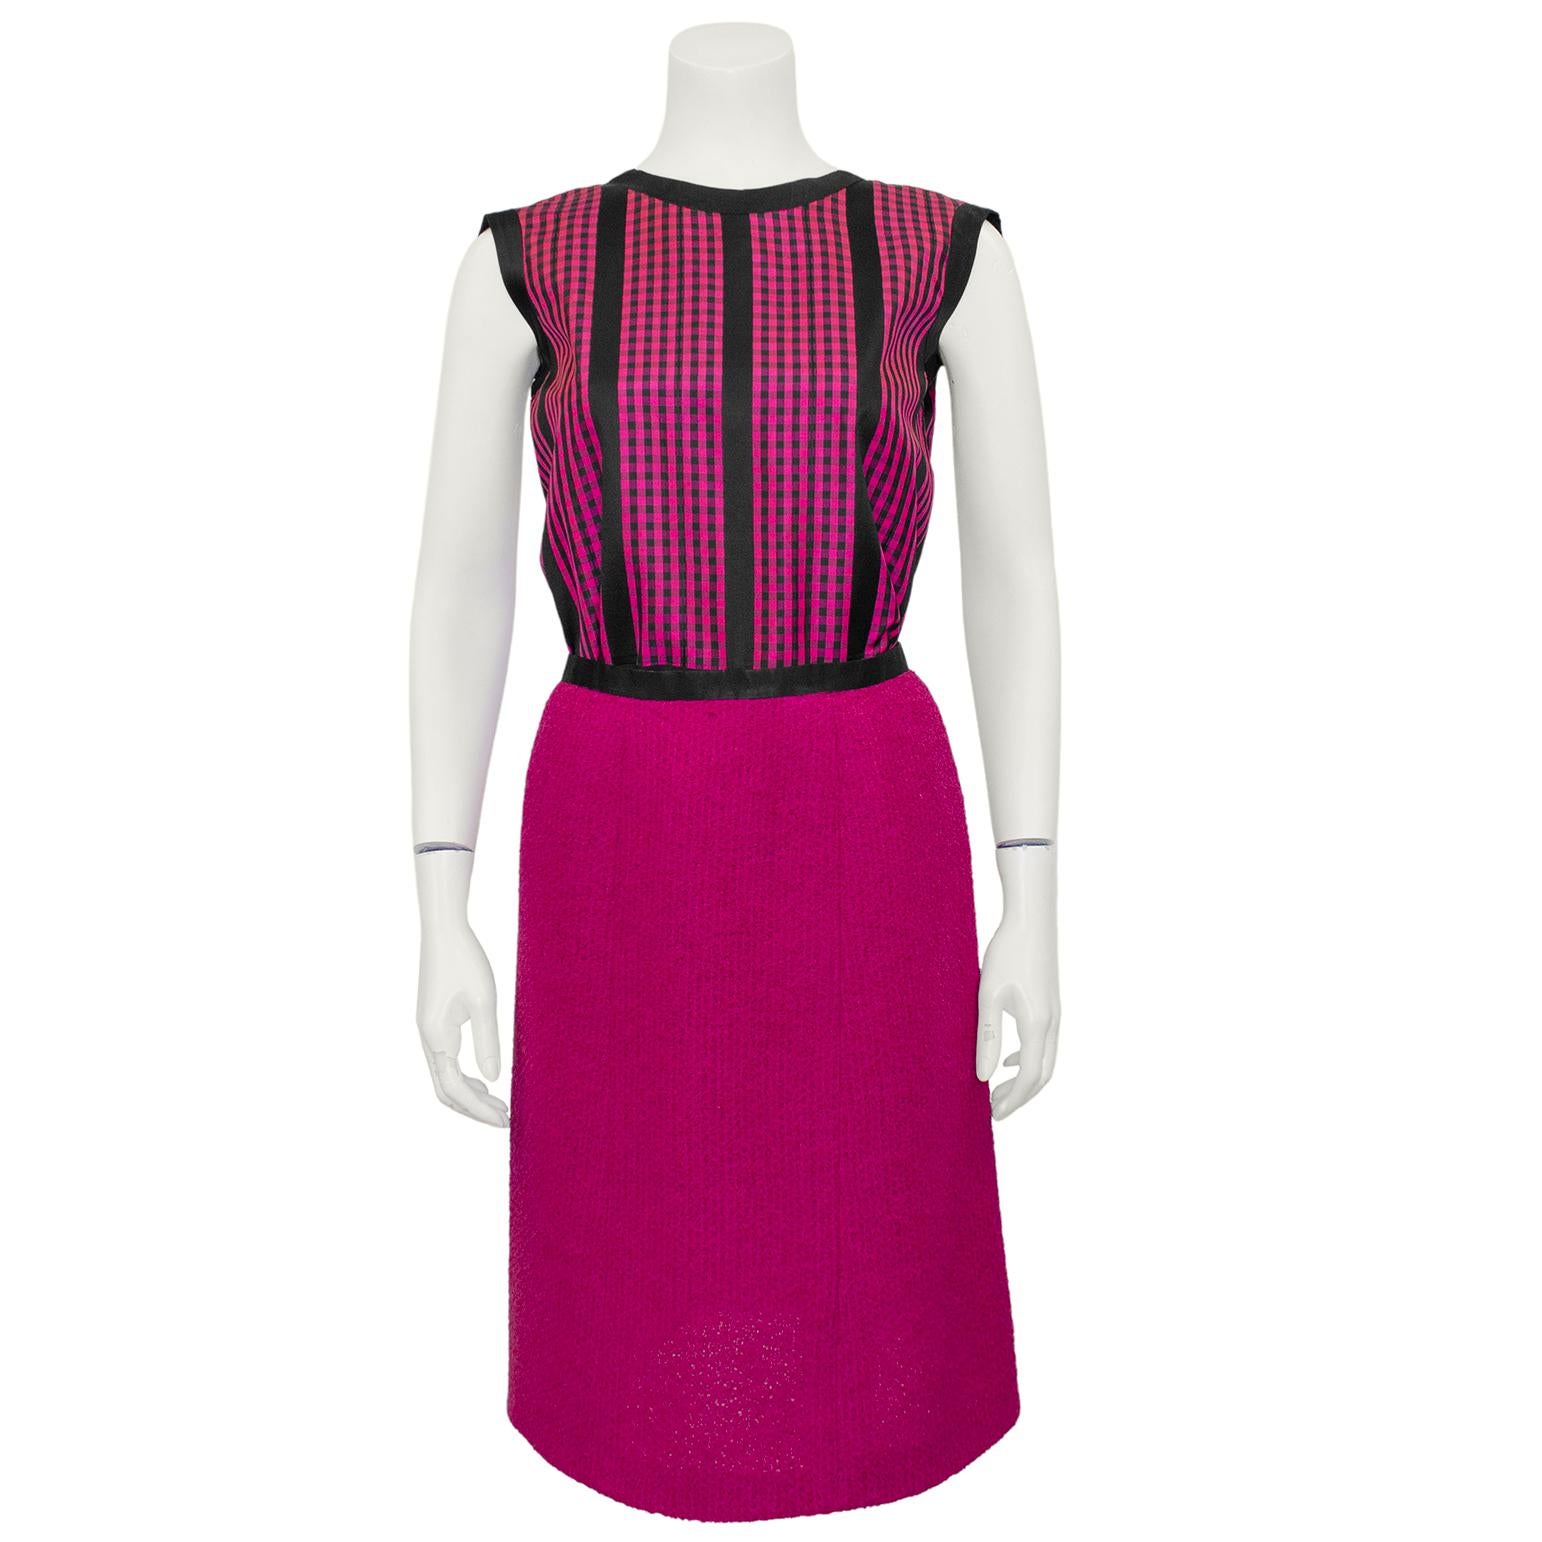 Dating from the 1960s, this three piece Chanel Haute Couture raspberry pink and black ensemble is pure perfection. The pink wool jacket is collarless with rounded edges and black silk trim. The chevron details on the patch pockets are very unique